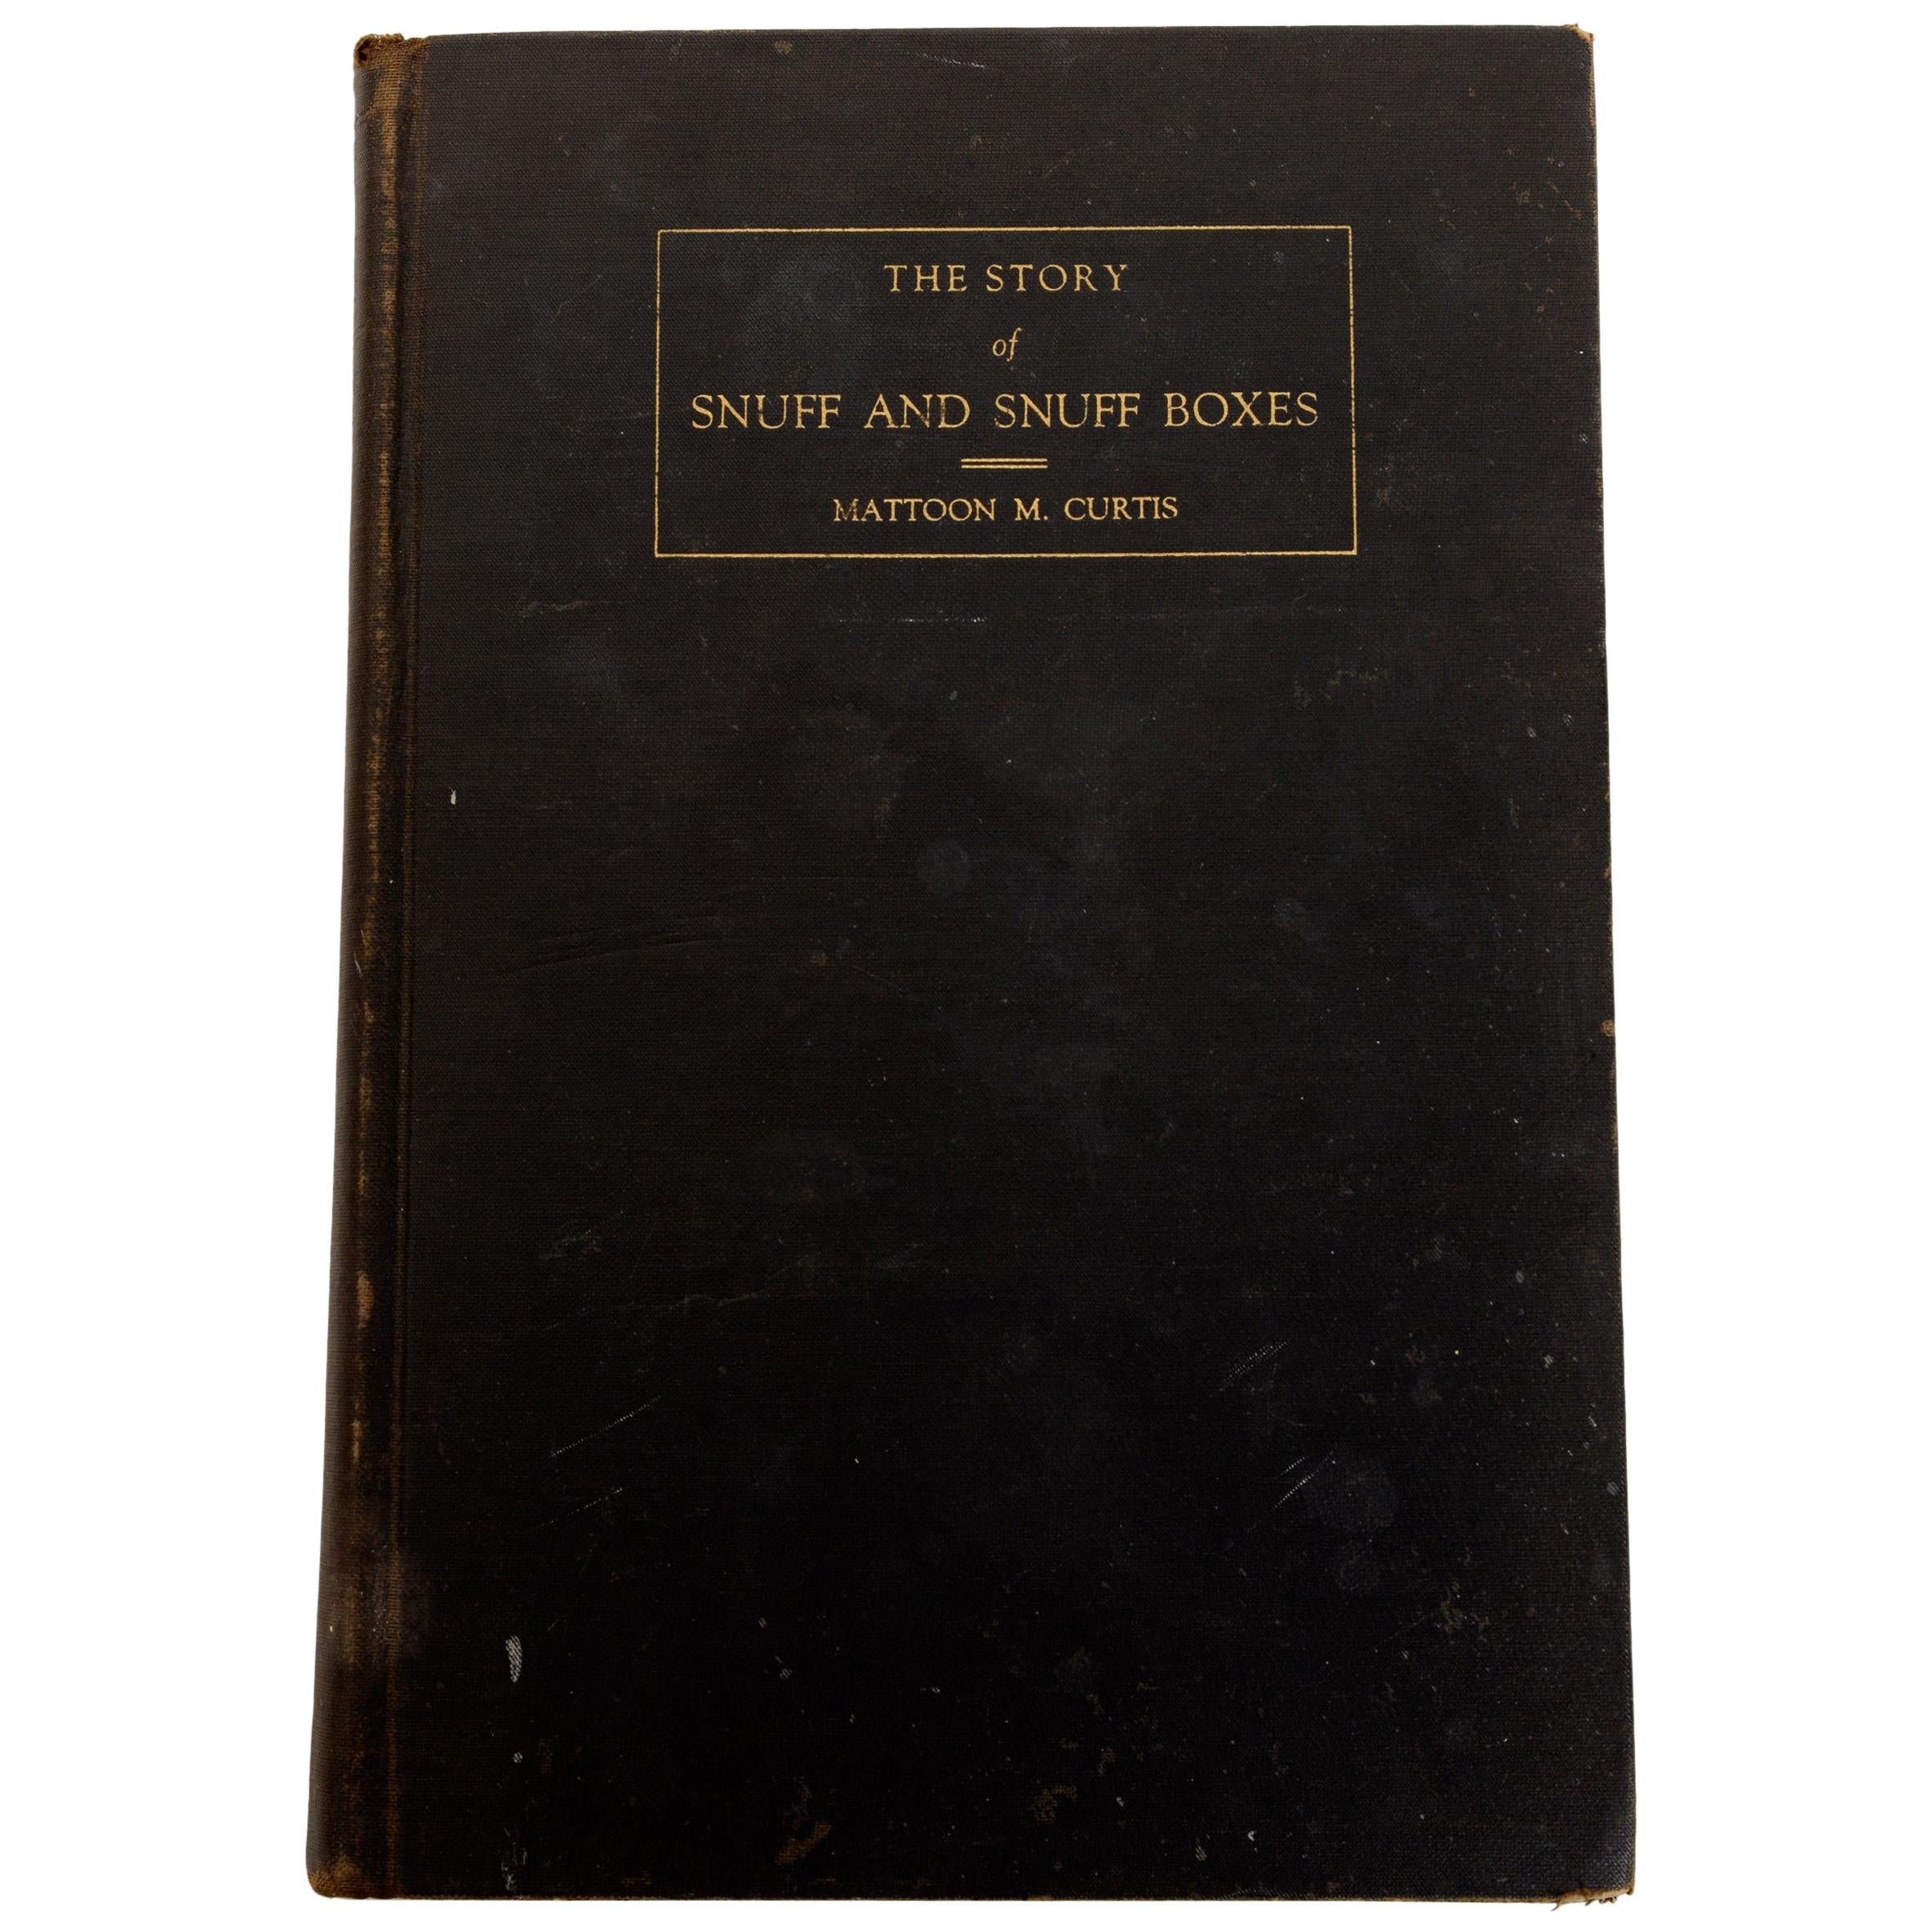 'The Story of Snuff and Snuff Boxes', Mattoon M. Curtis First Edition Inscribed